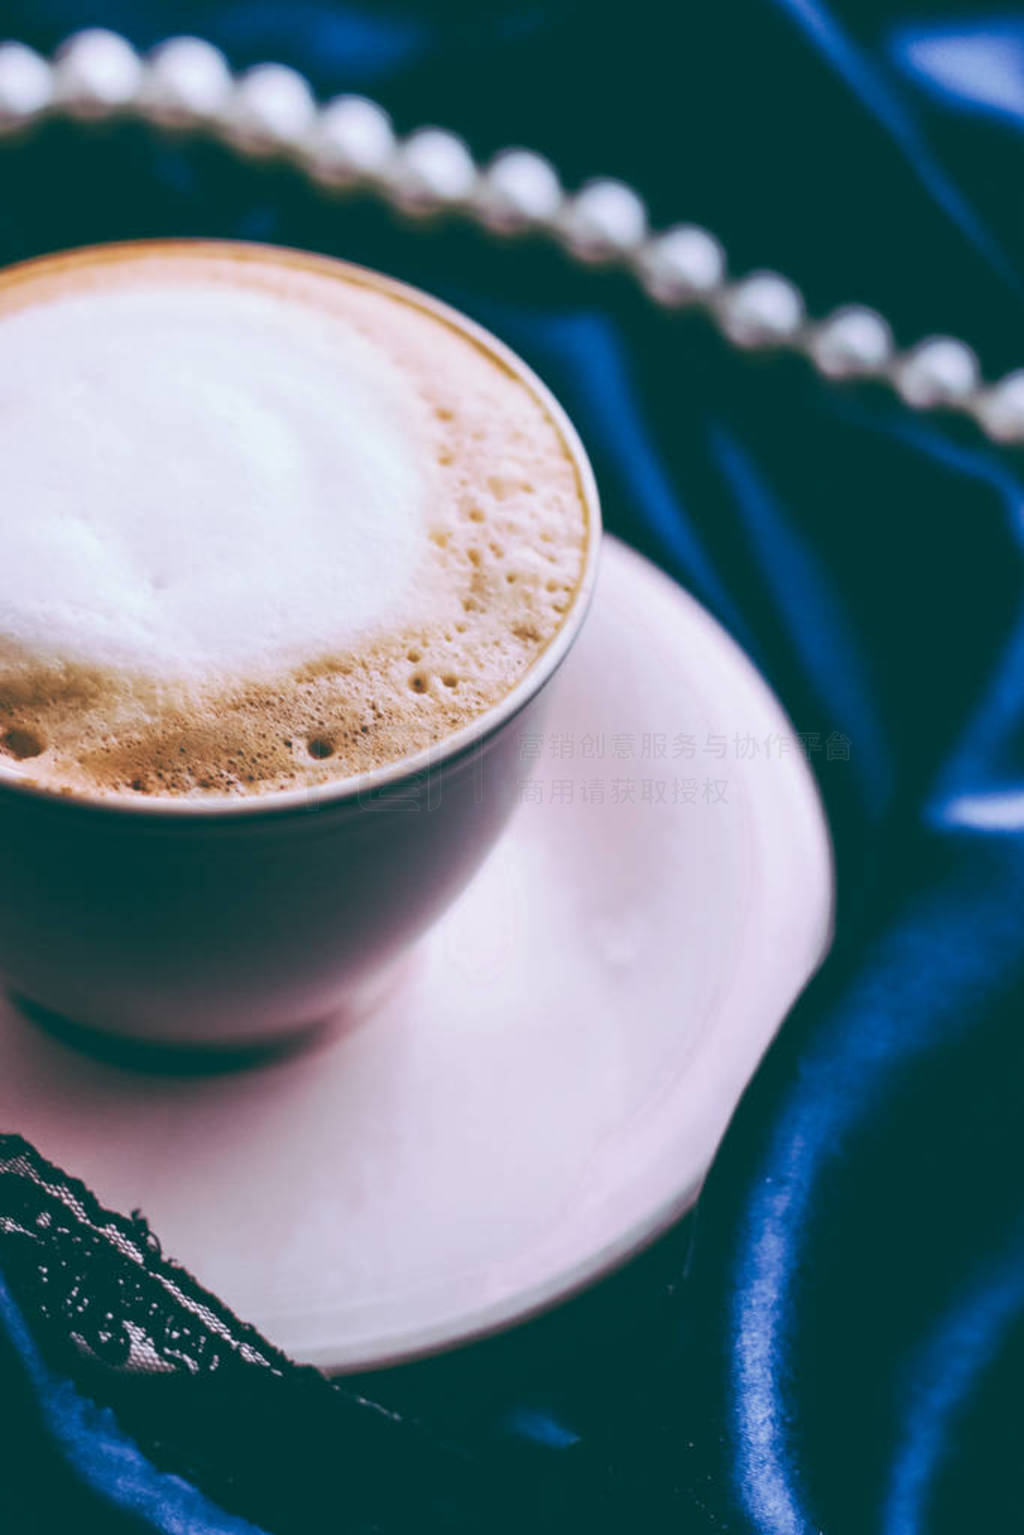 Cup of cappuccino for breakfast with satin and pearls jewellery